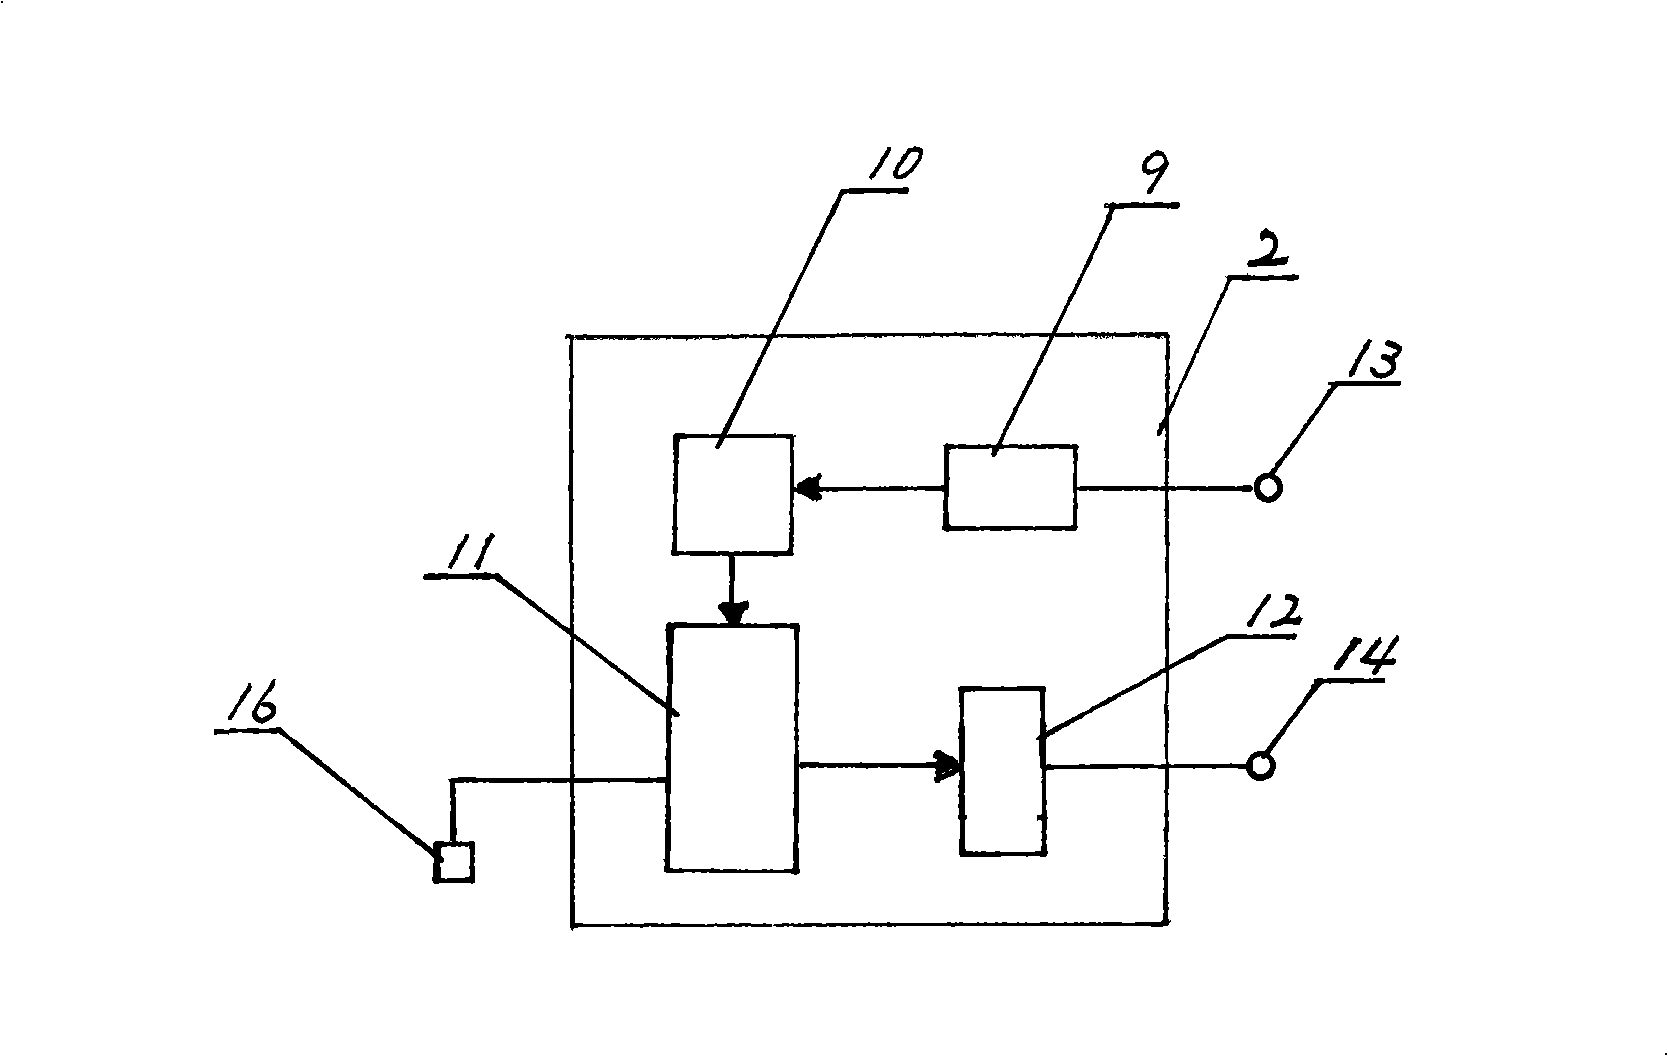 Drip irrigation device for treating sand with spraying film covered network and pulse pump